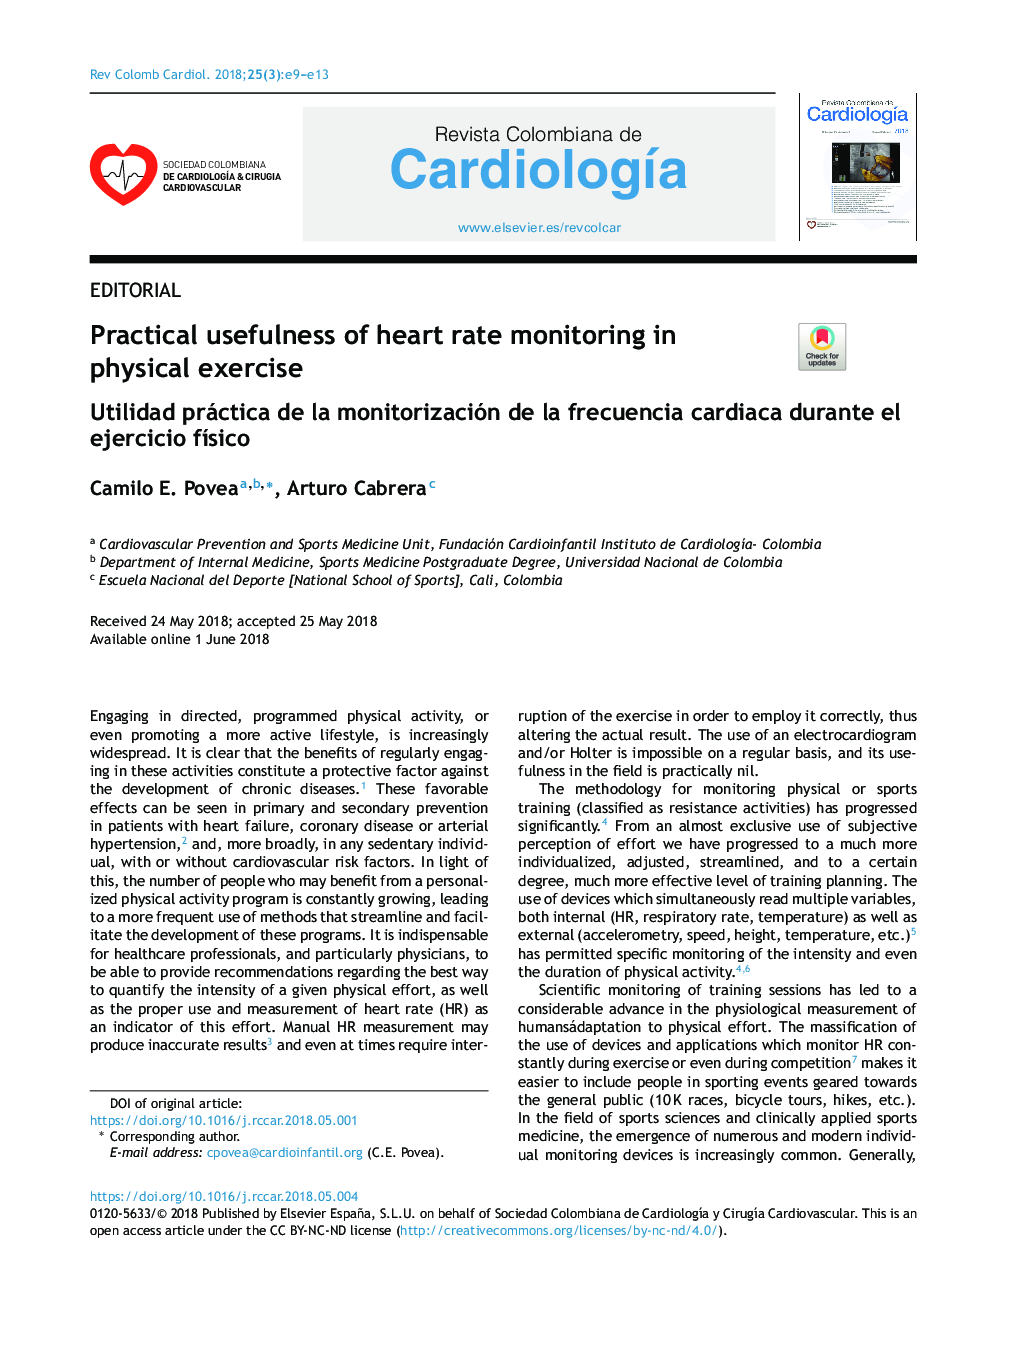 Practical usefulness of heart rate monitoring in physical exercise